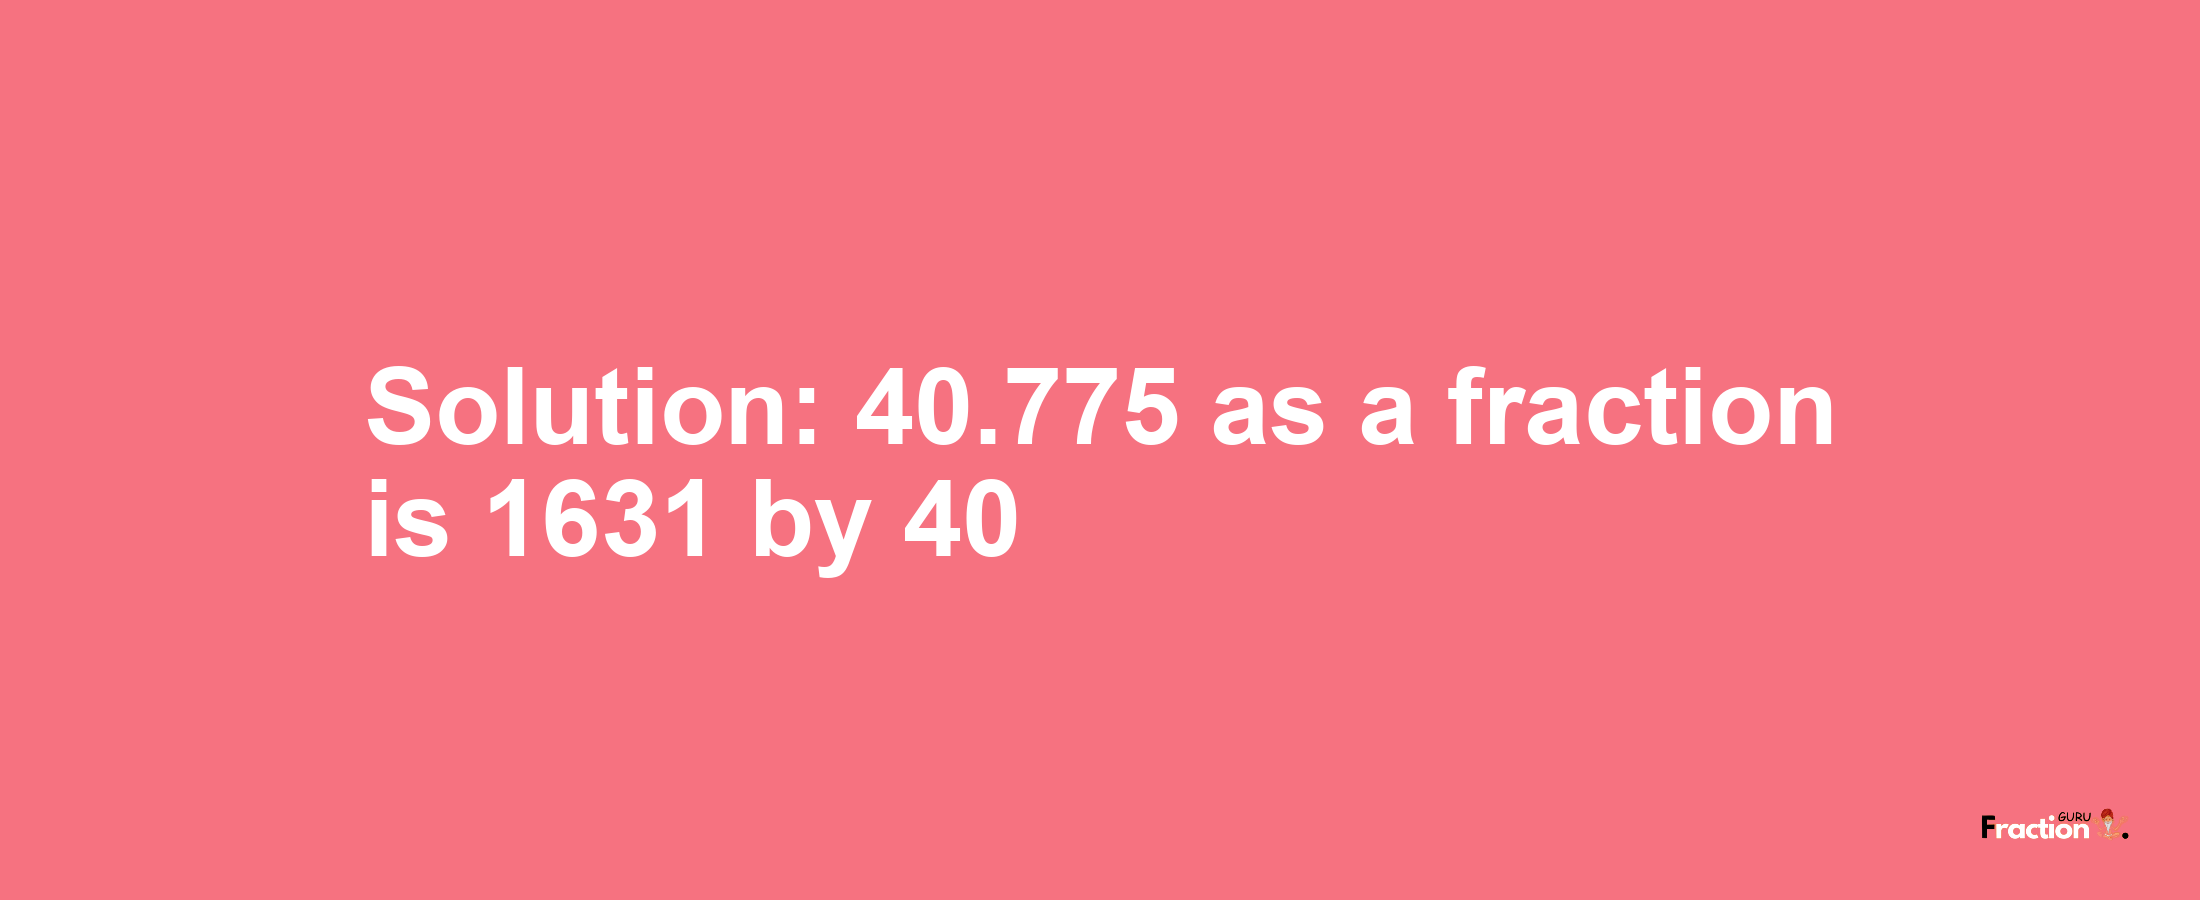 Solution:40.775 as a fraction is 1631/40